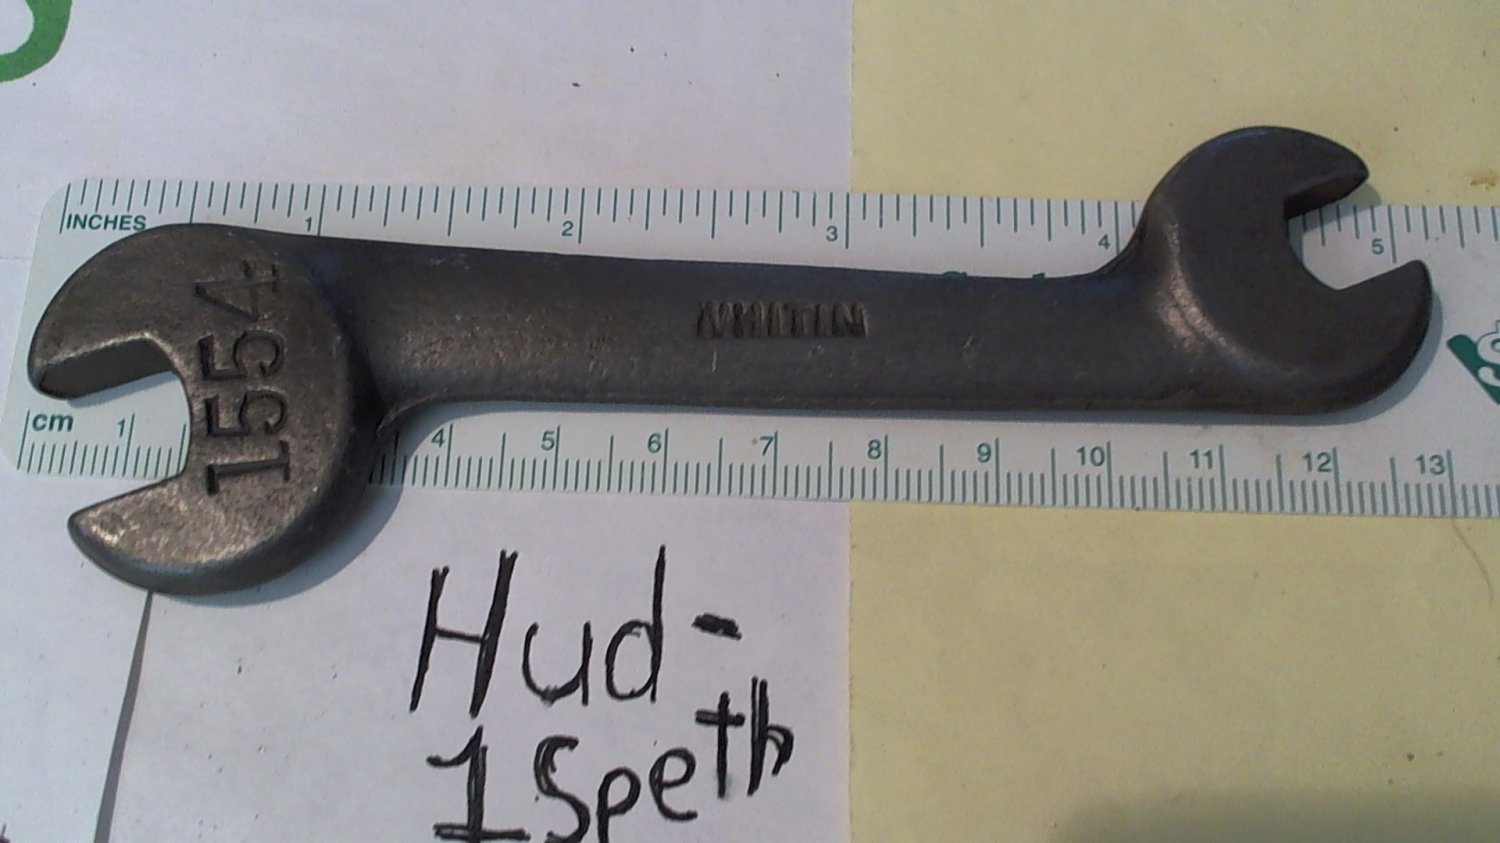 Vintage Used (Whitin 1554) Wrench Collectable